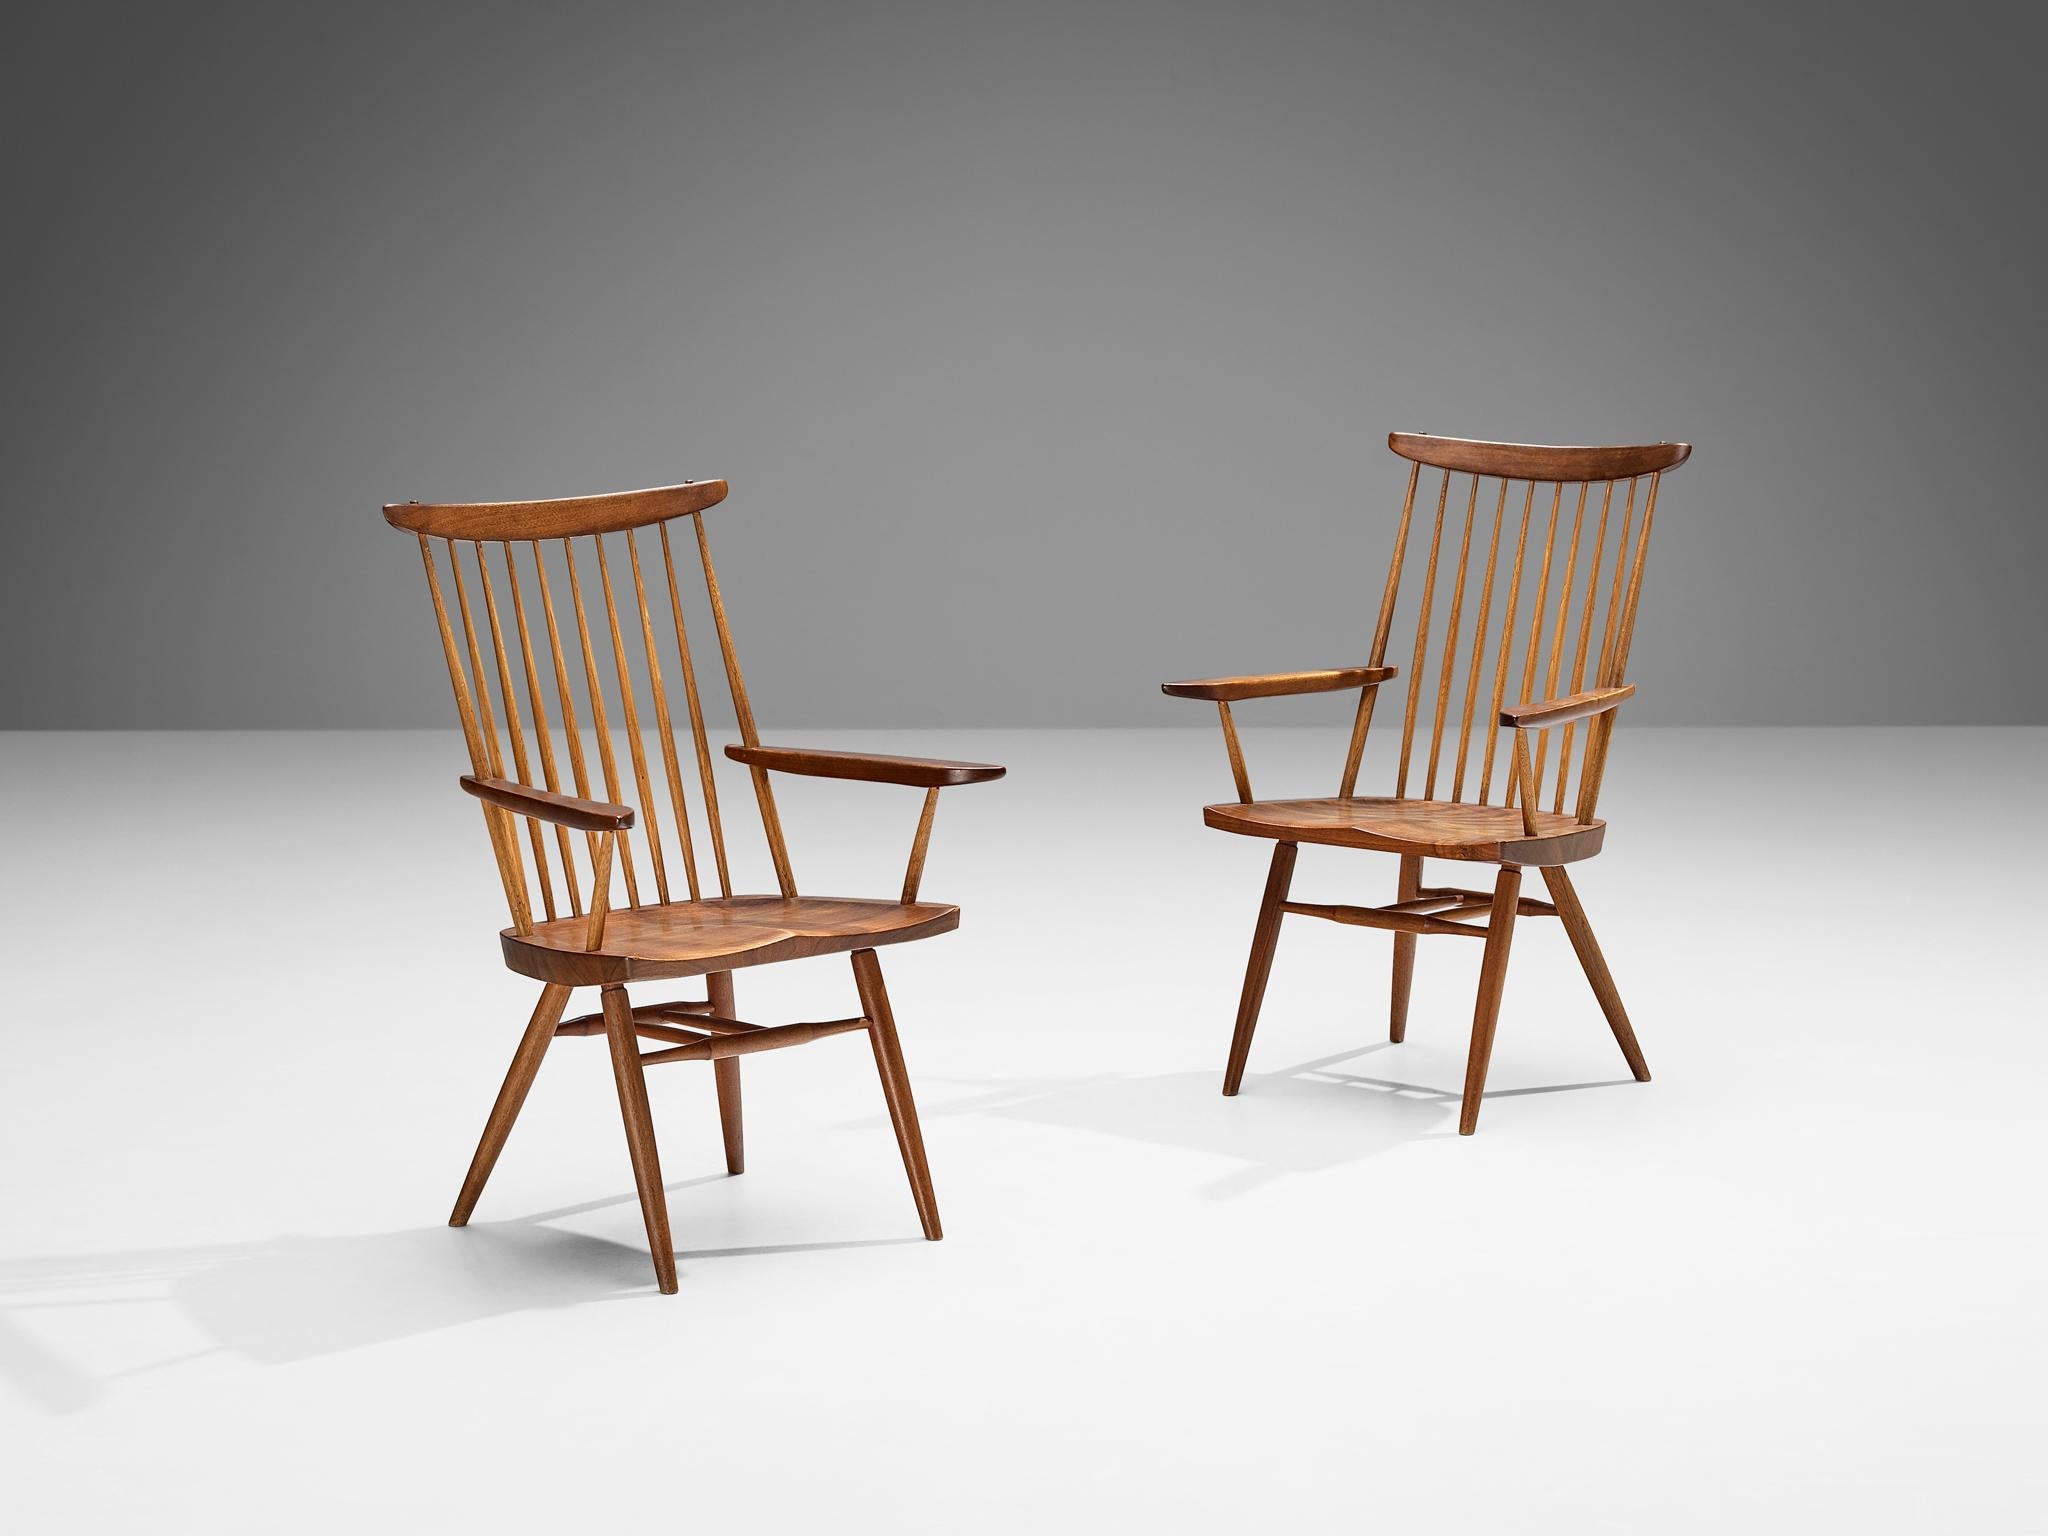 George Nakashima for Nakashima Studio, pair of ‘New’ armchairs, walnut, hickory, United States, 1960 

With regard to its essential form, material use, and woodwork, this ‘New’ armchair is a testimony to George Nakashima's expert craftsmanship and